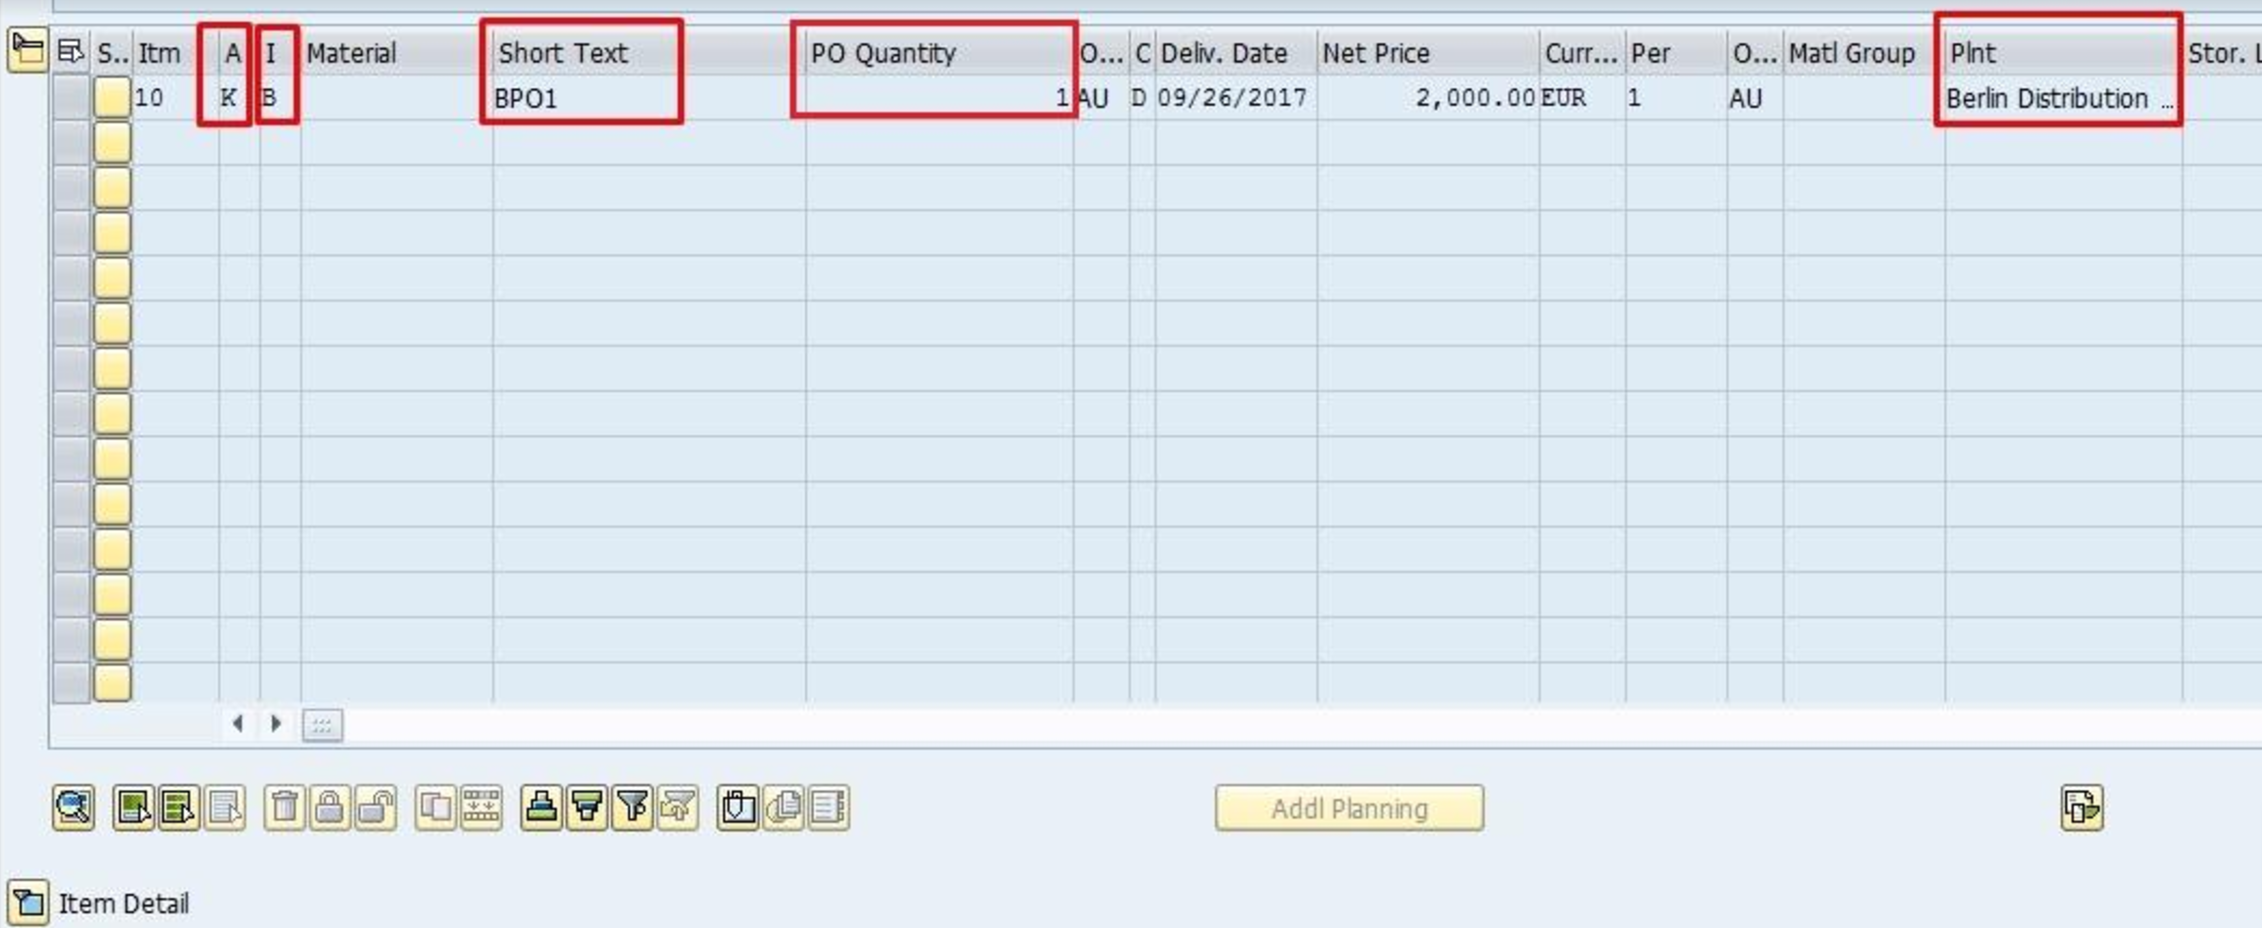 purchase order account assignment category